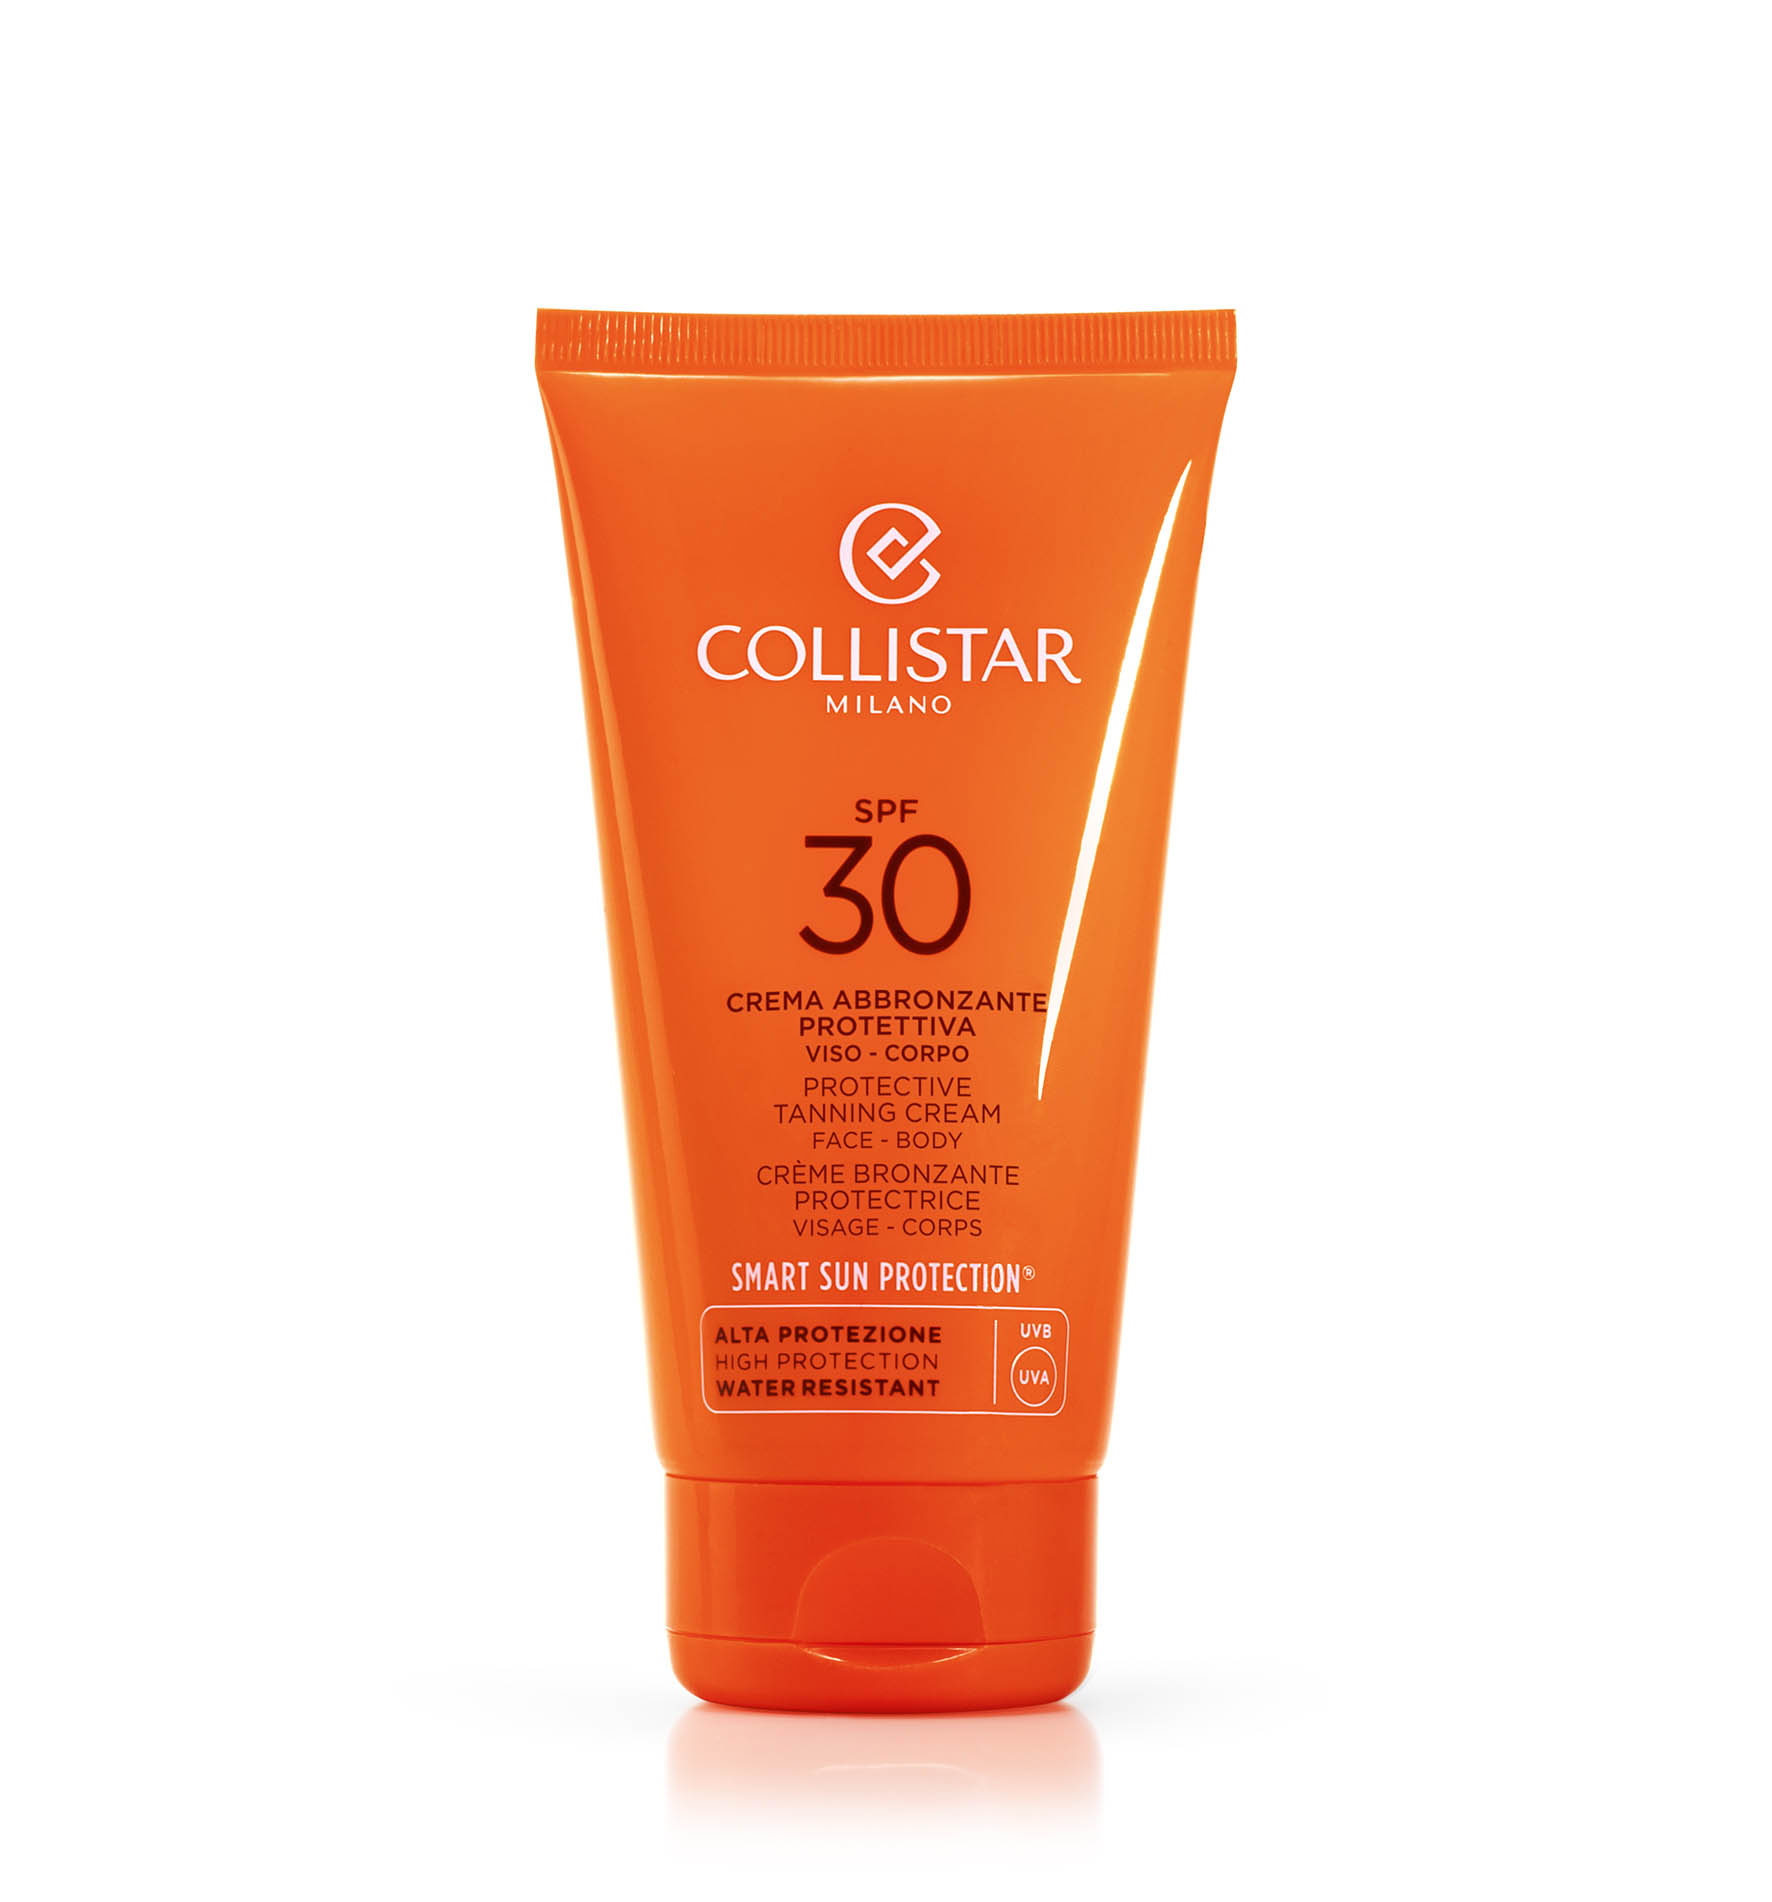 ULTRA PROTECTION TANNING CREAM FACE - BODY SPF 30 - NEW | Collistar - Shop Online Ufficiale